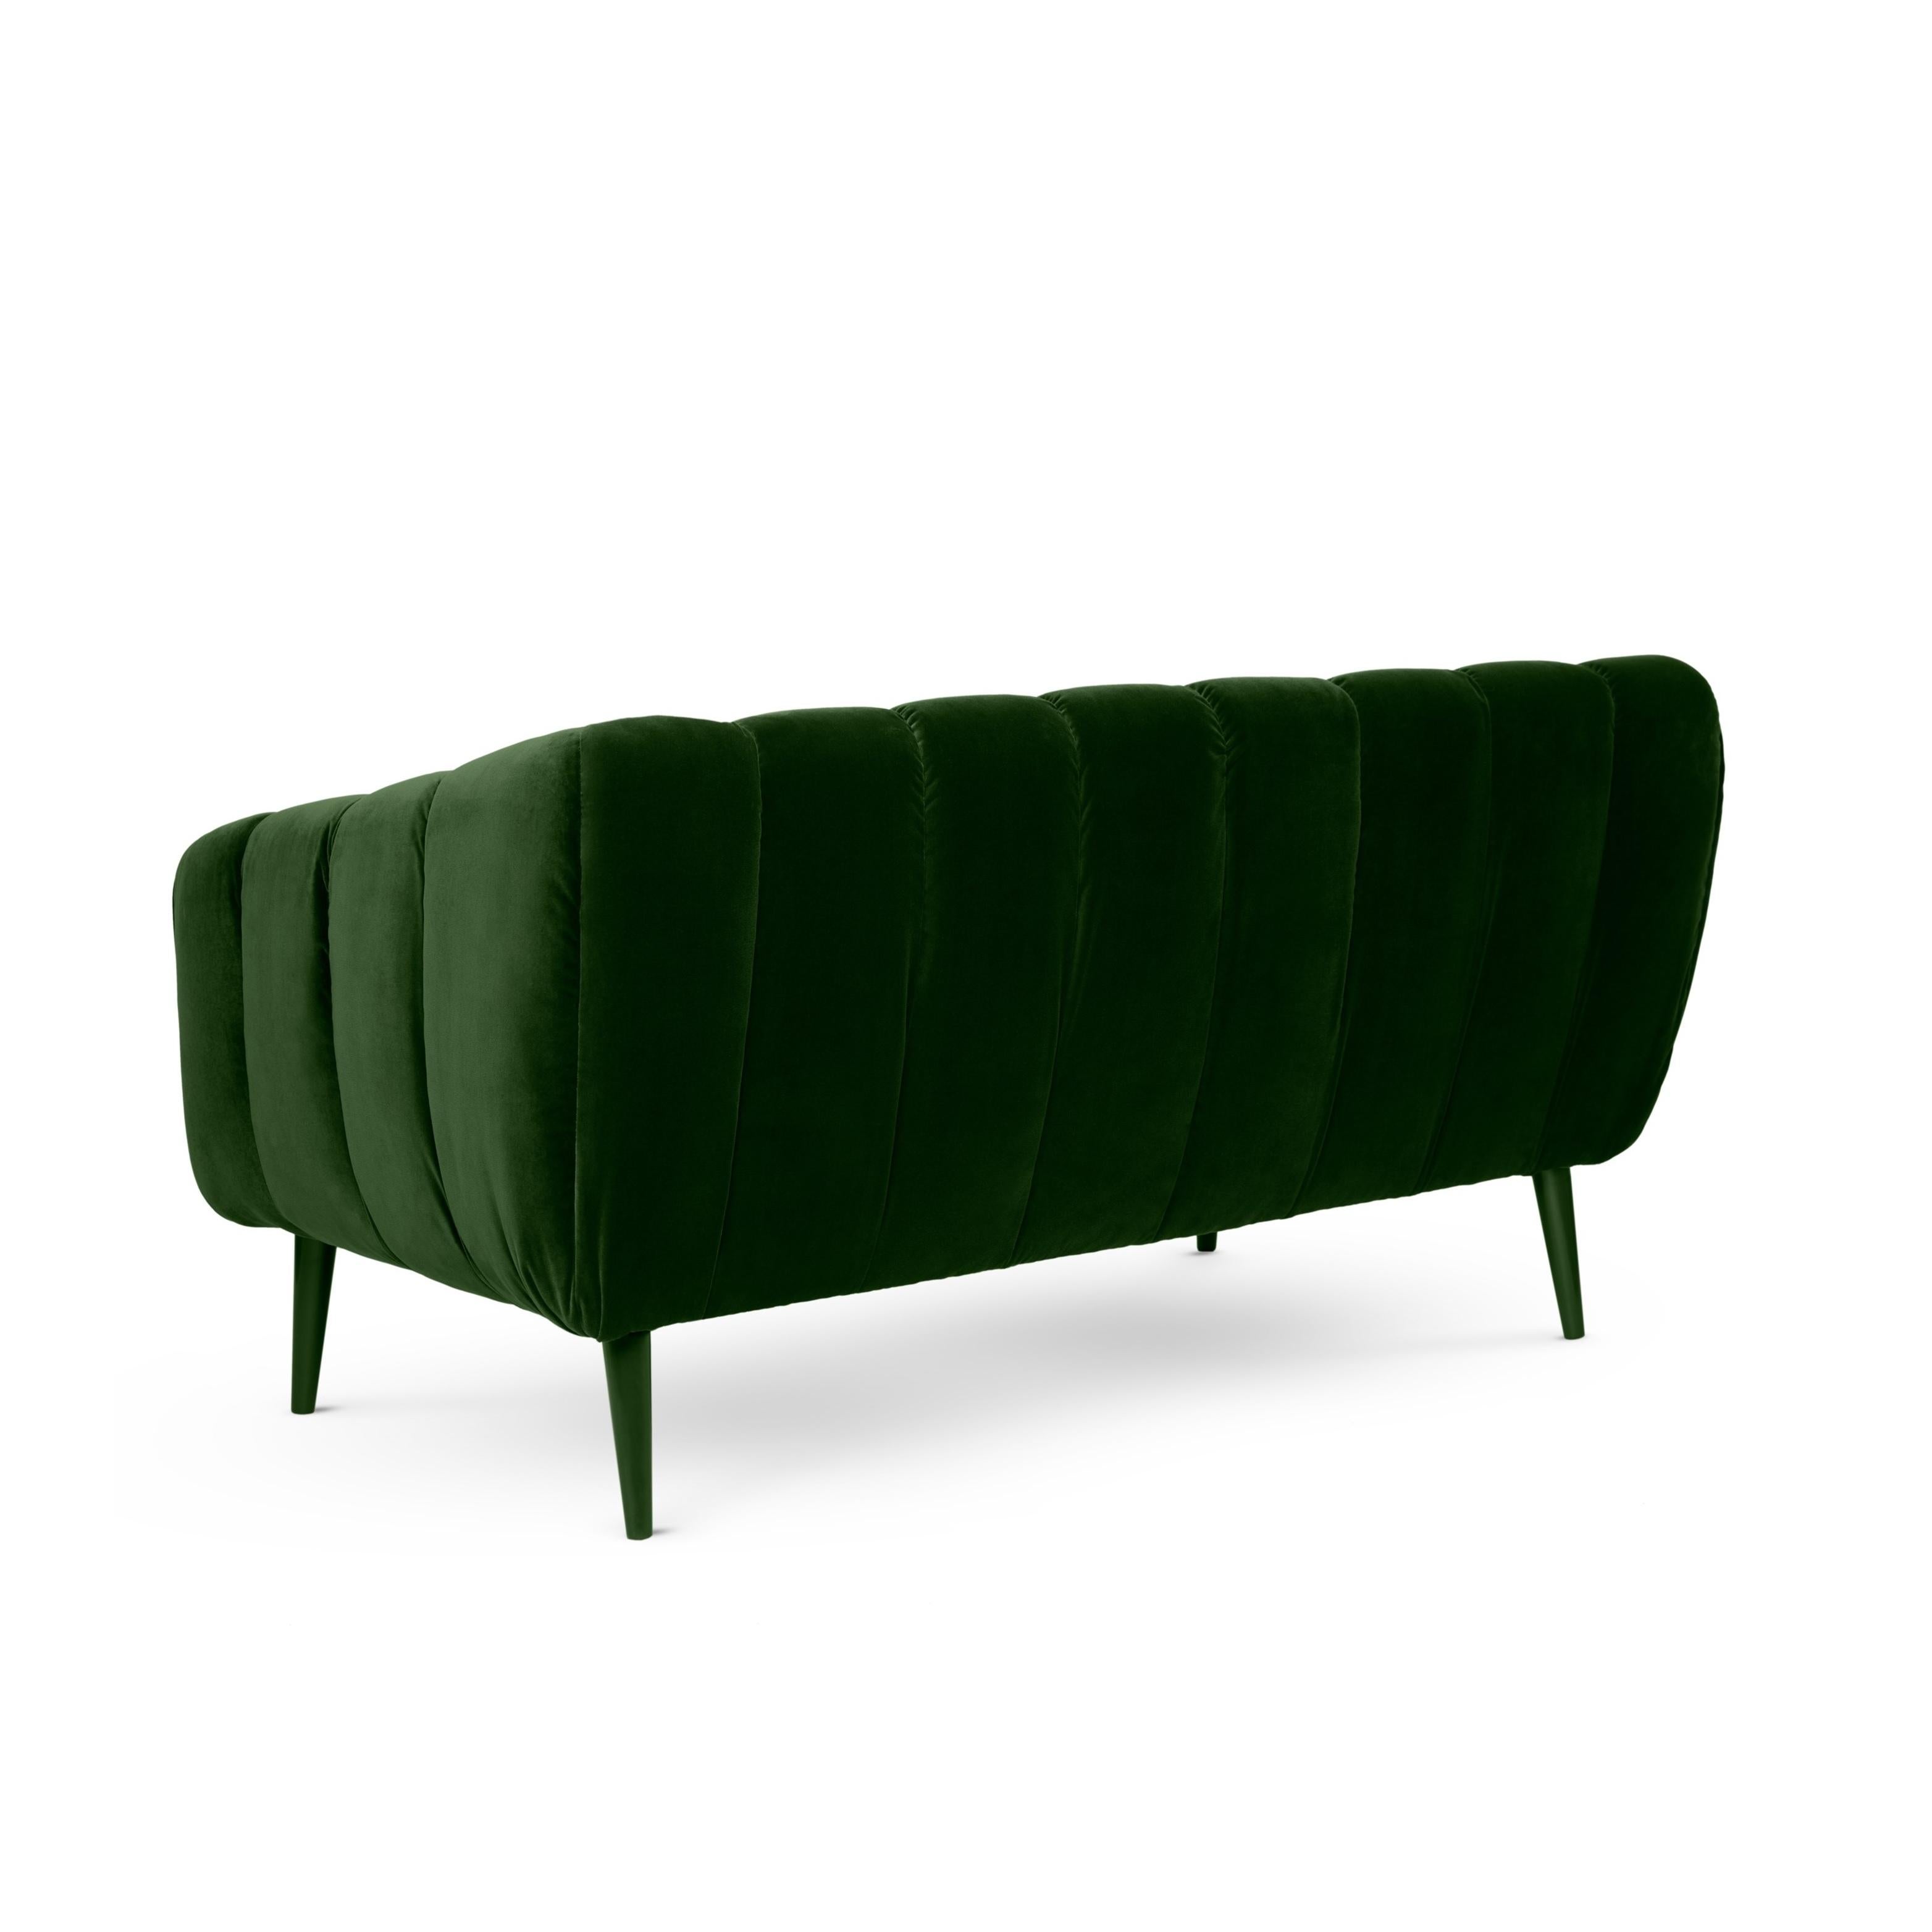 Portuguese Contemporary Channel-Tufted Sofa Offered in Velvet For Sale